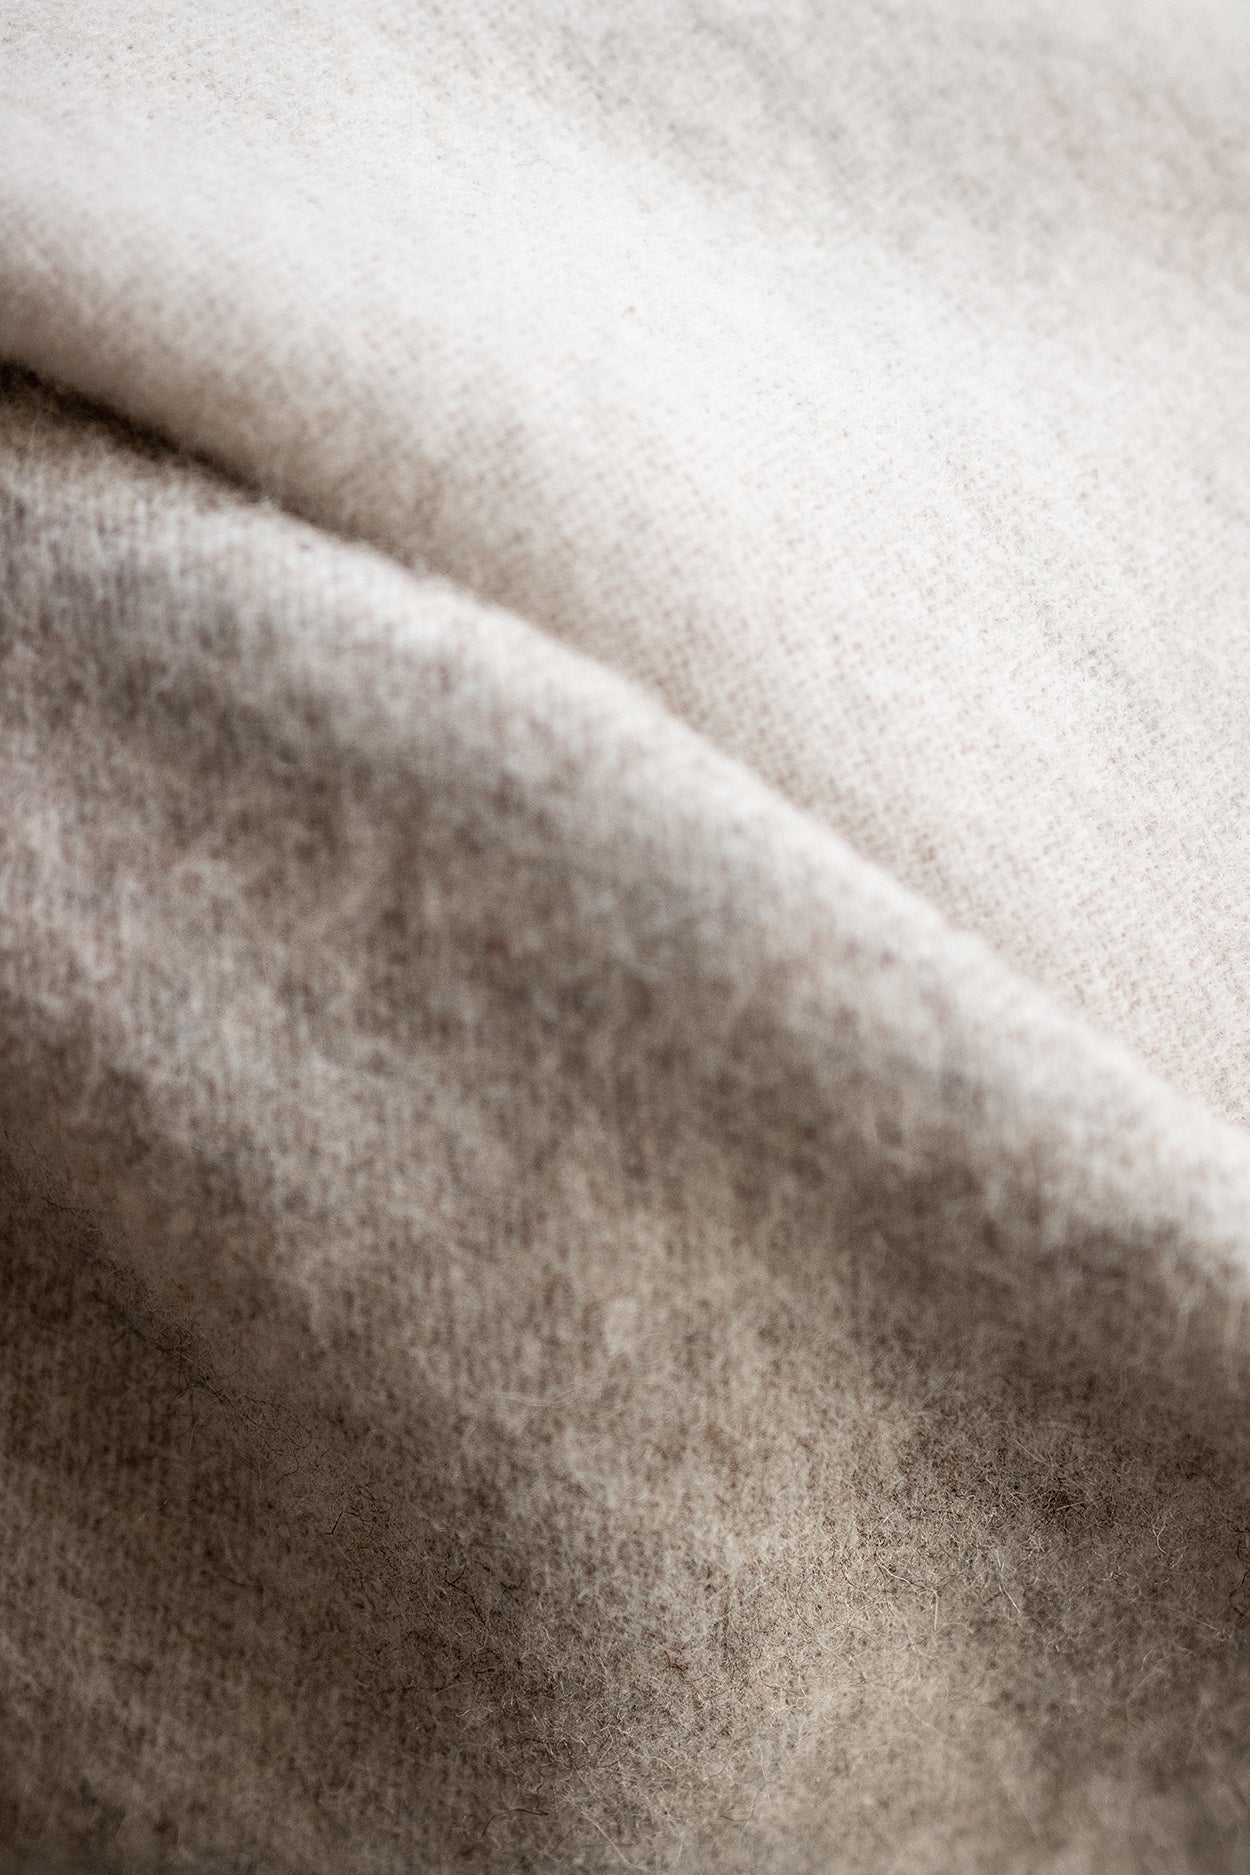 Close-up of the Duo Wool Blanket, showcasing its woven texture and fine craftsmanship. Made from pure wool, a natural material known for its warmth and comfort.